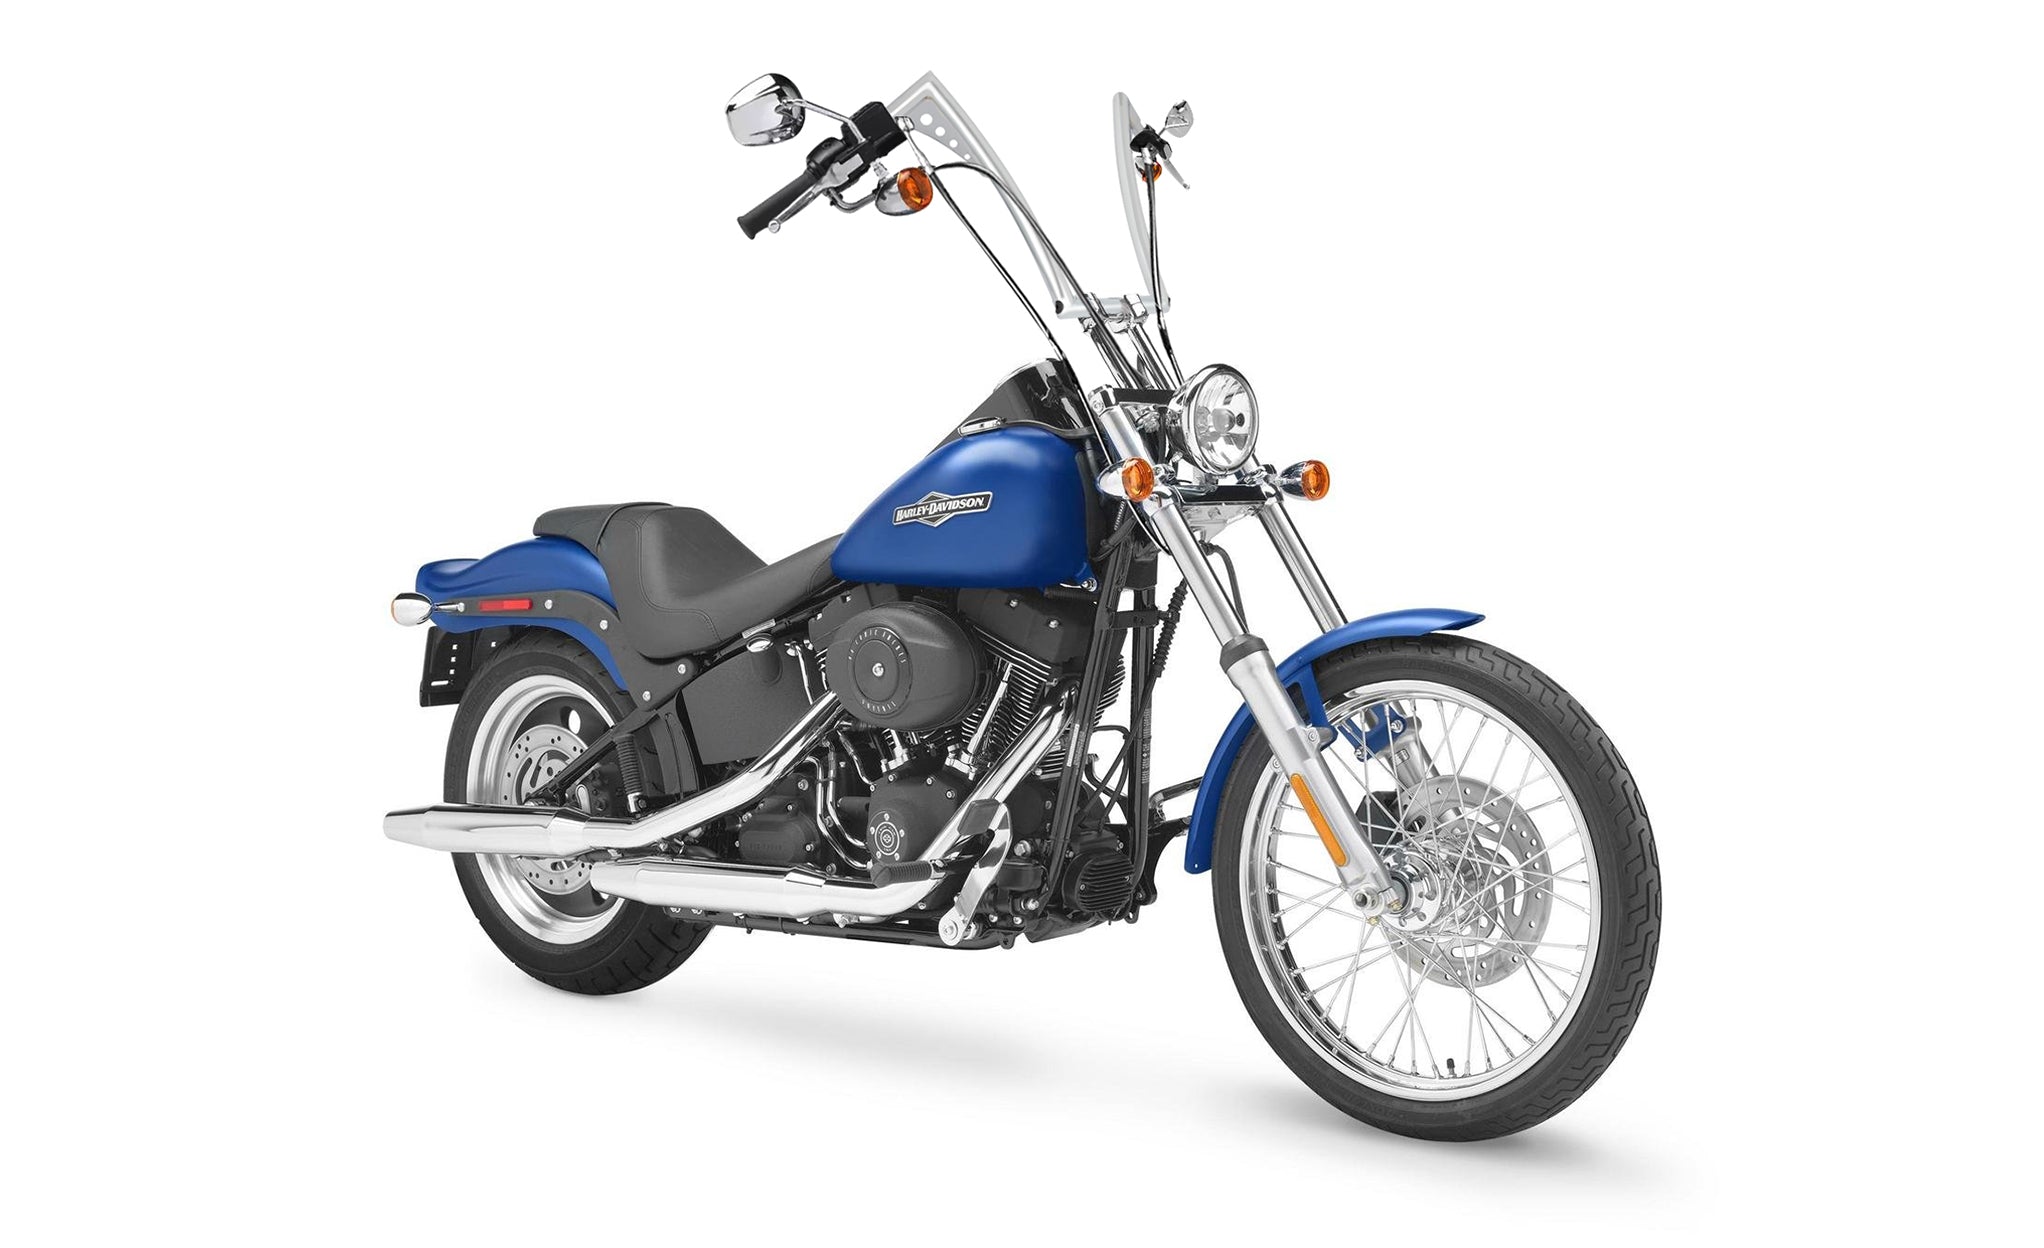 Viking Iron Born 12" Handlebar For Harley Dyna Low Rider FXDL Chrome Bag on Bike View @expand